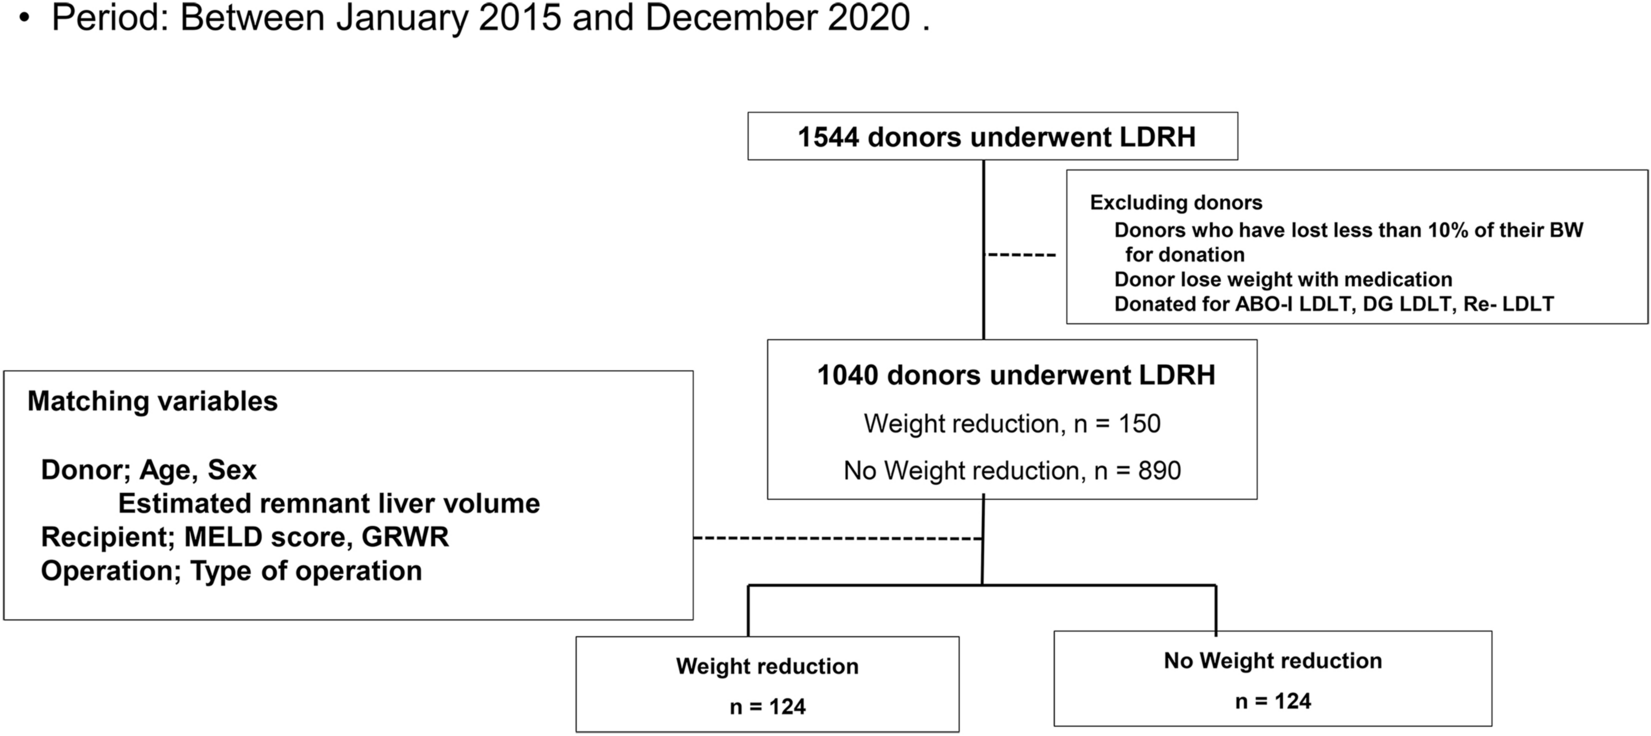 Safety of right liver donation after improving steatosis through weight loss in living donors: a retrospective study